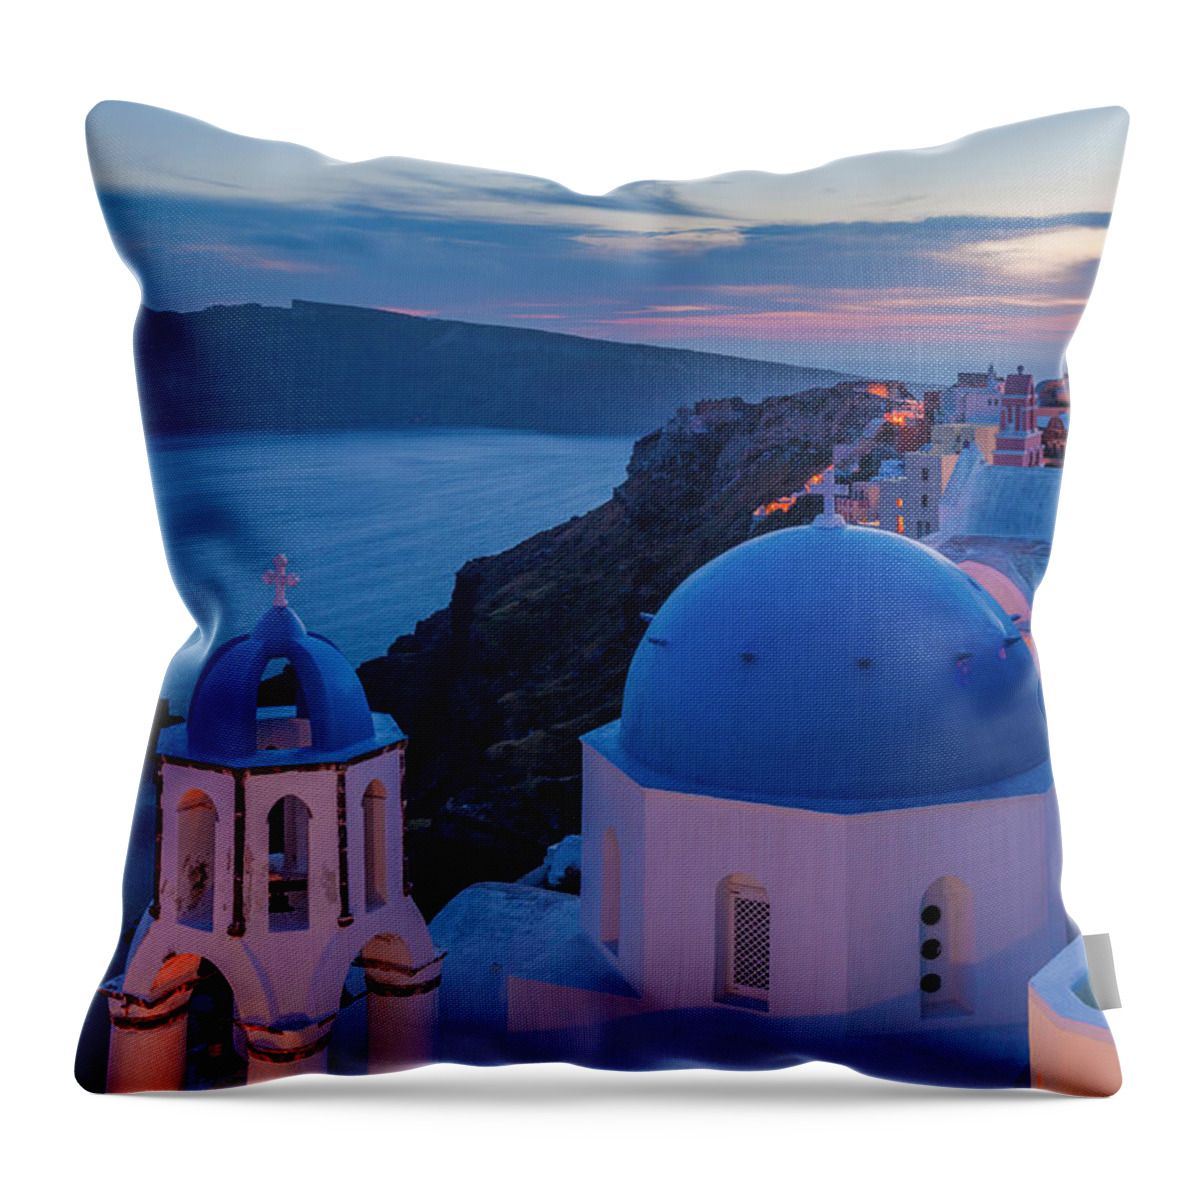 Aegean Sea Throw Pillow featuring the photograph Blue Domes Of Santorini by Evgeni Dinev